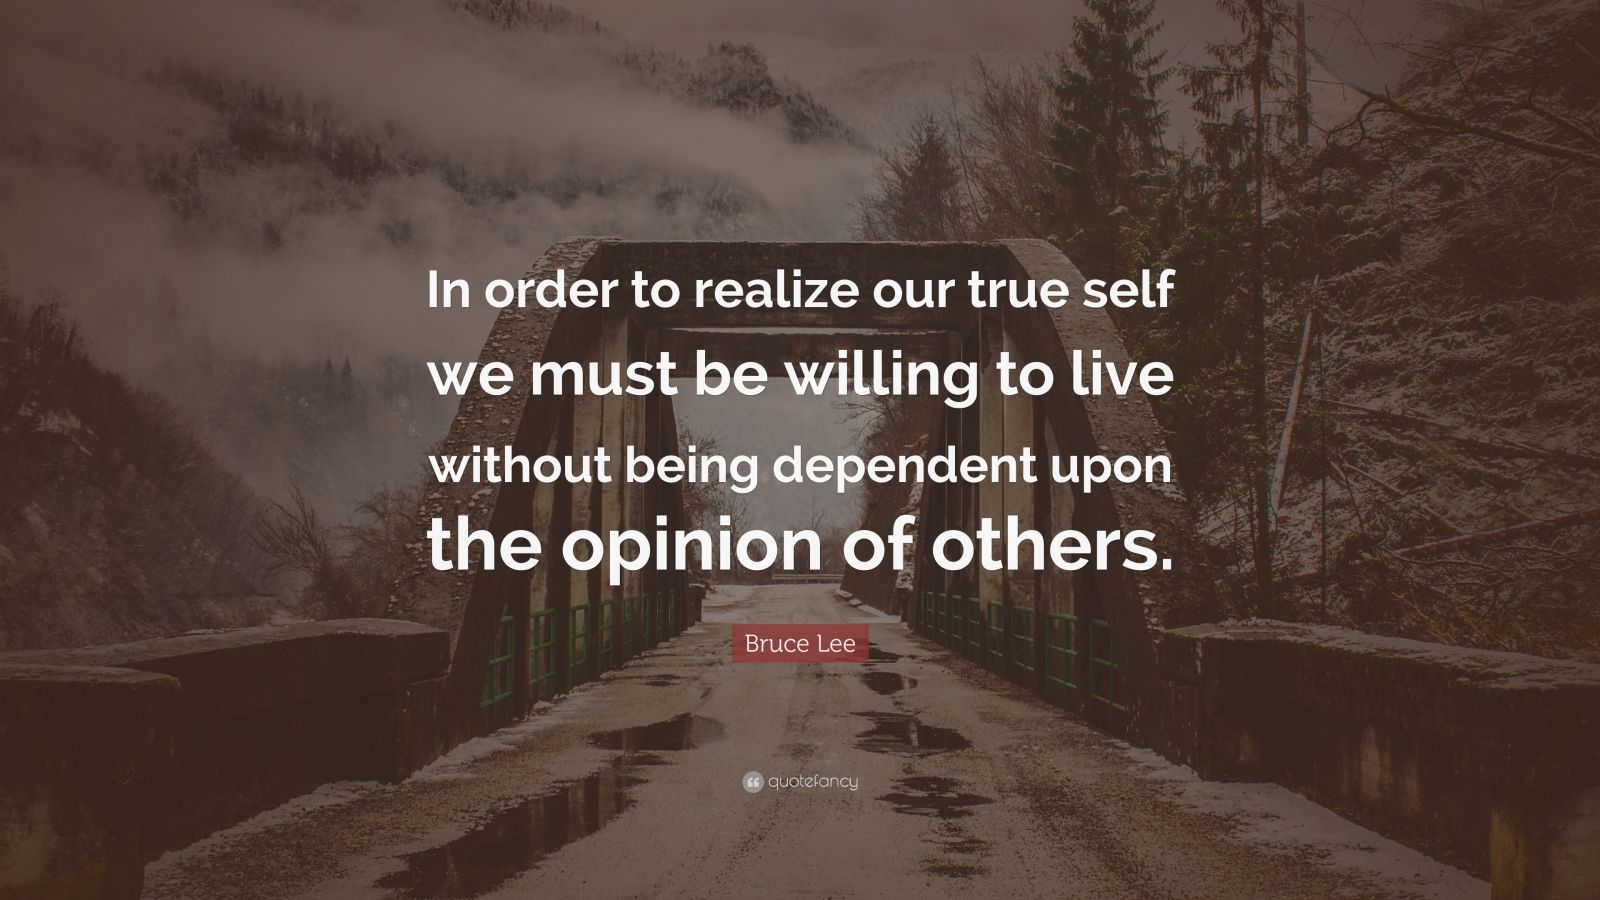 Bruce Lee Quote: “In order to realize our true self we must be willing